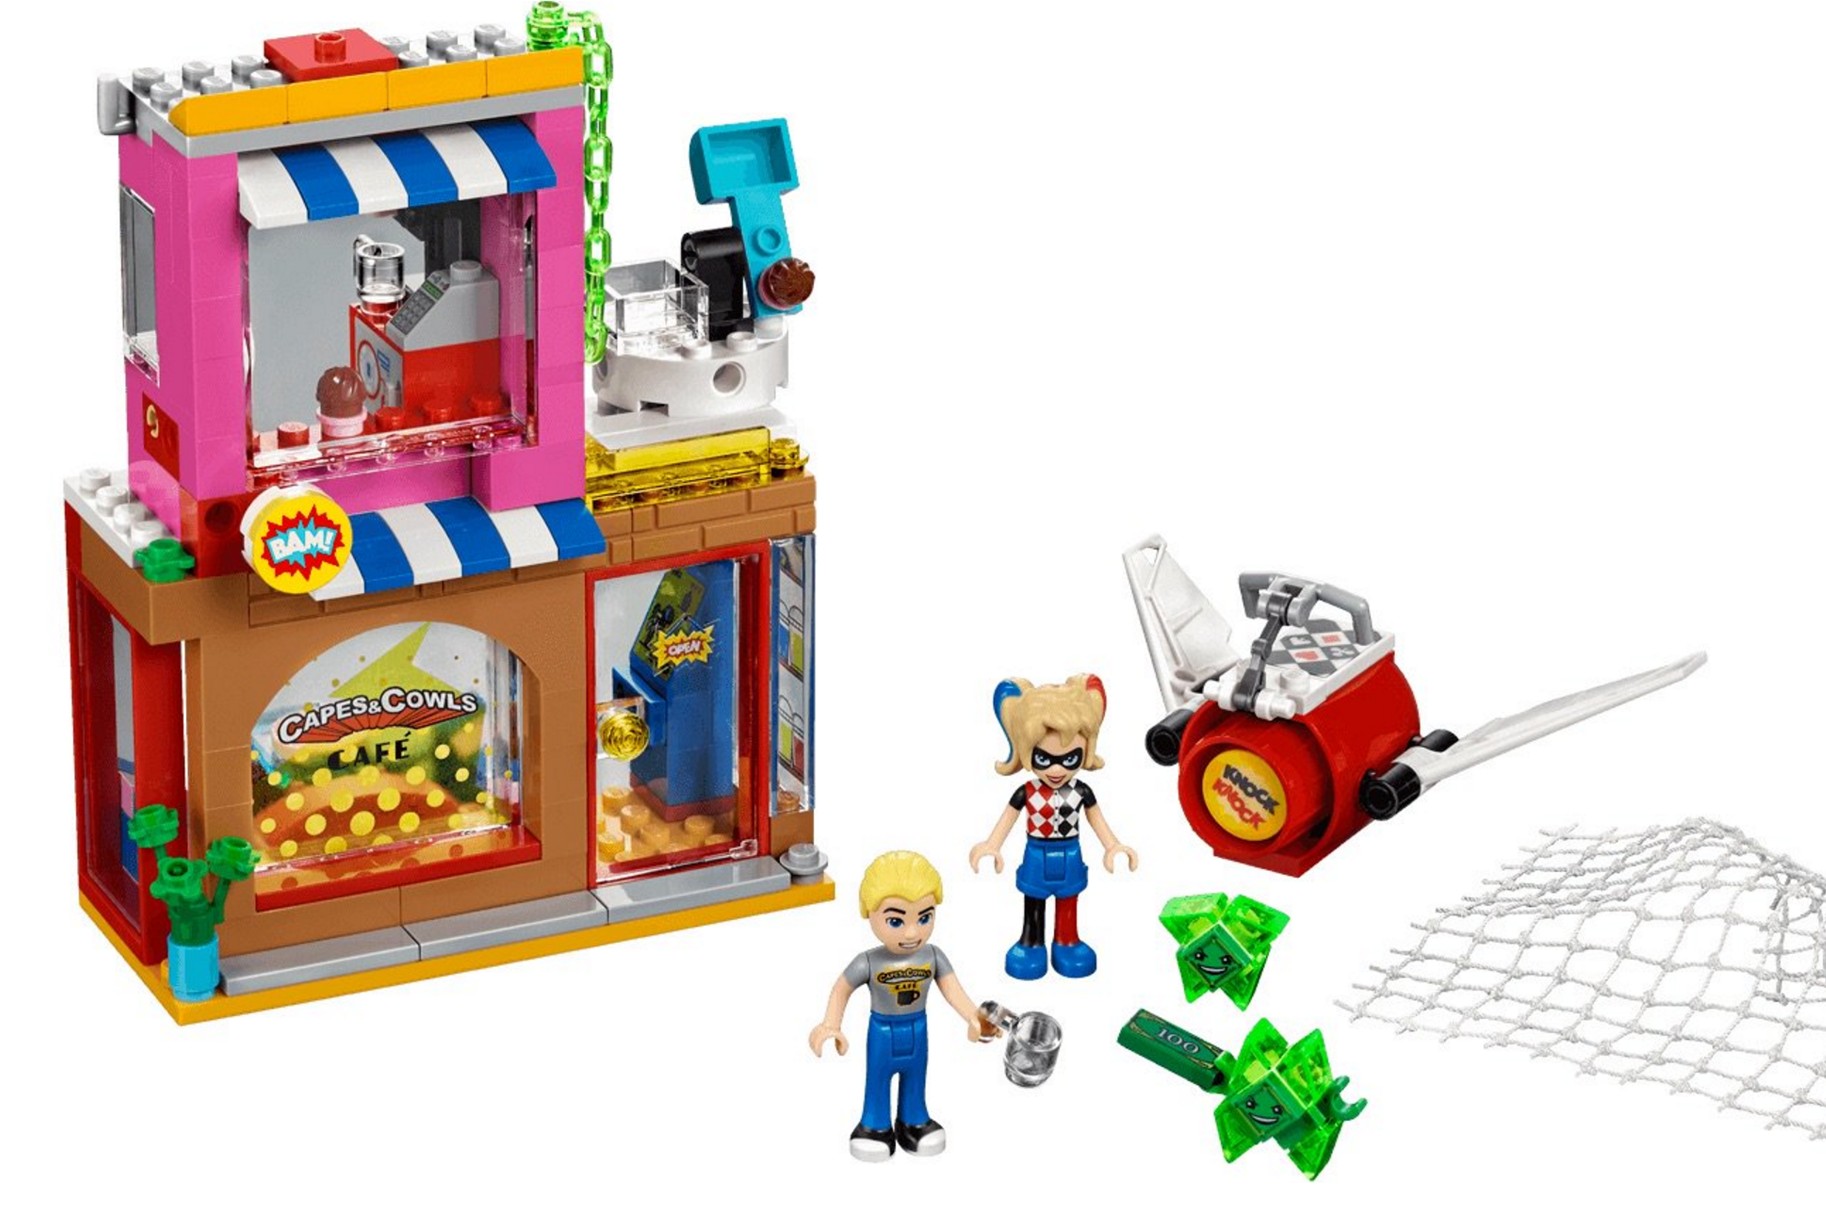 DC Super Hero Girls Sets Make The Most Of LEGO’s Friends Line